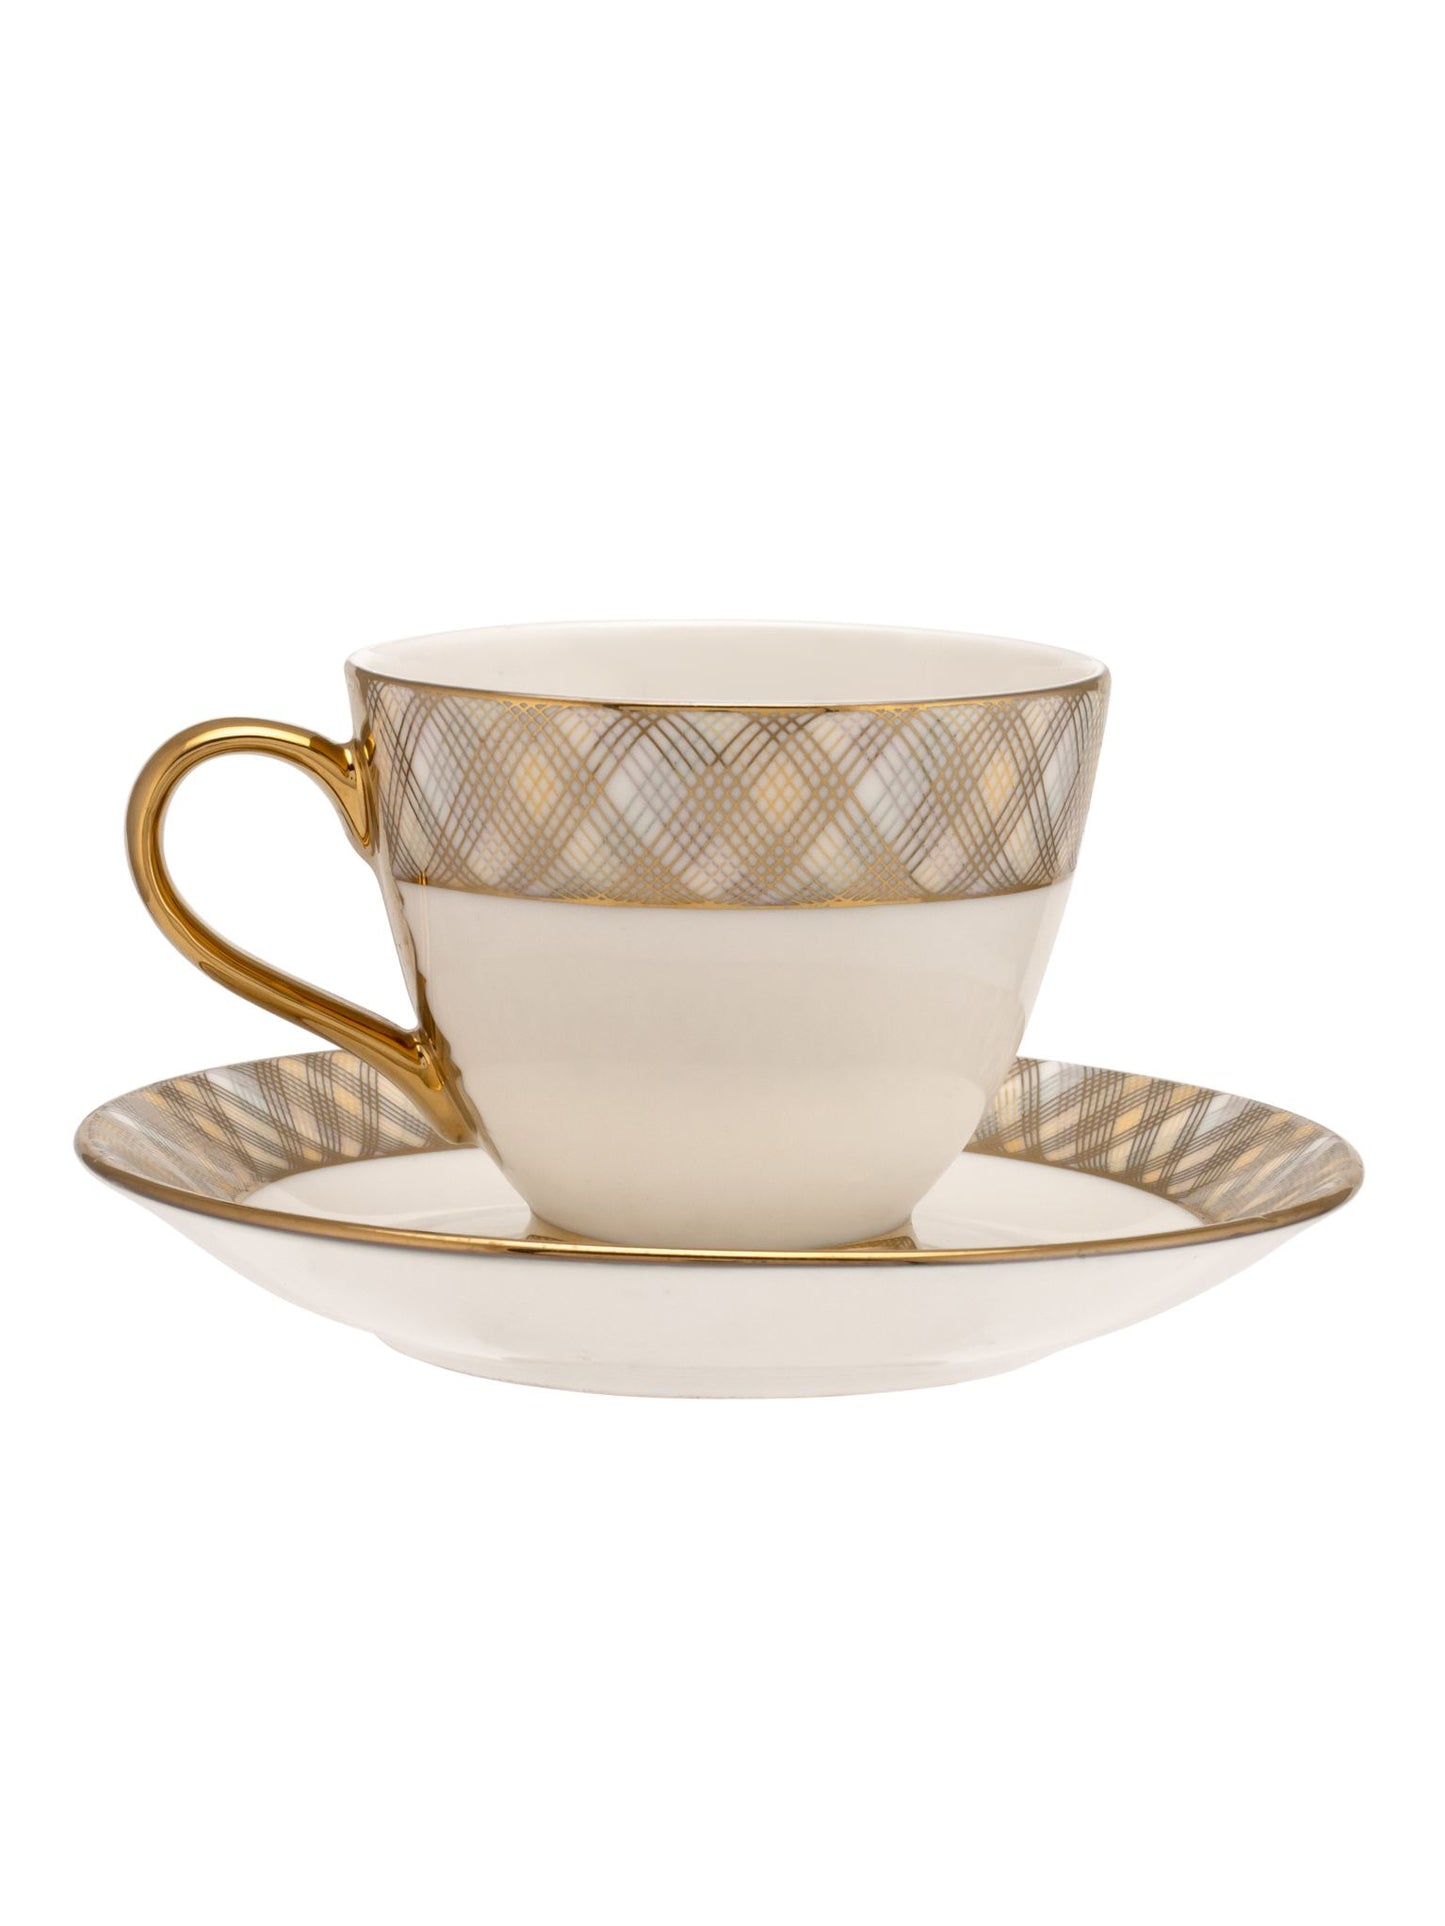 King Ebony Cup & Saucer, 160 ml, Set of 12 (6 Cups + 6 Saucers) (E601)